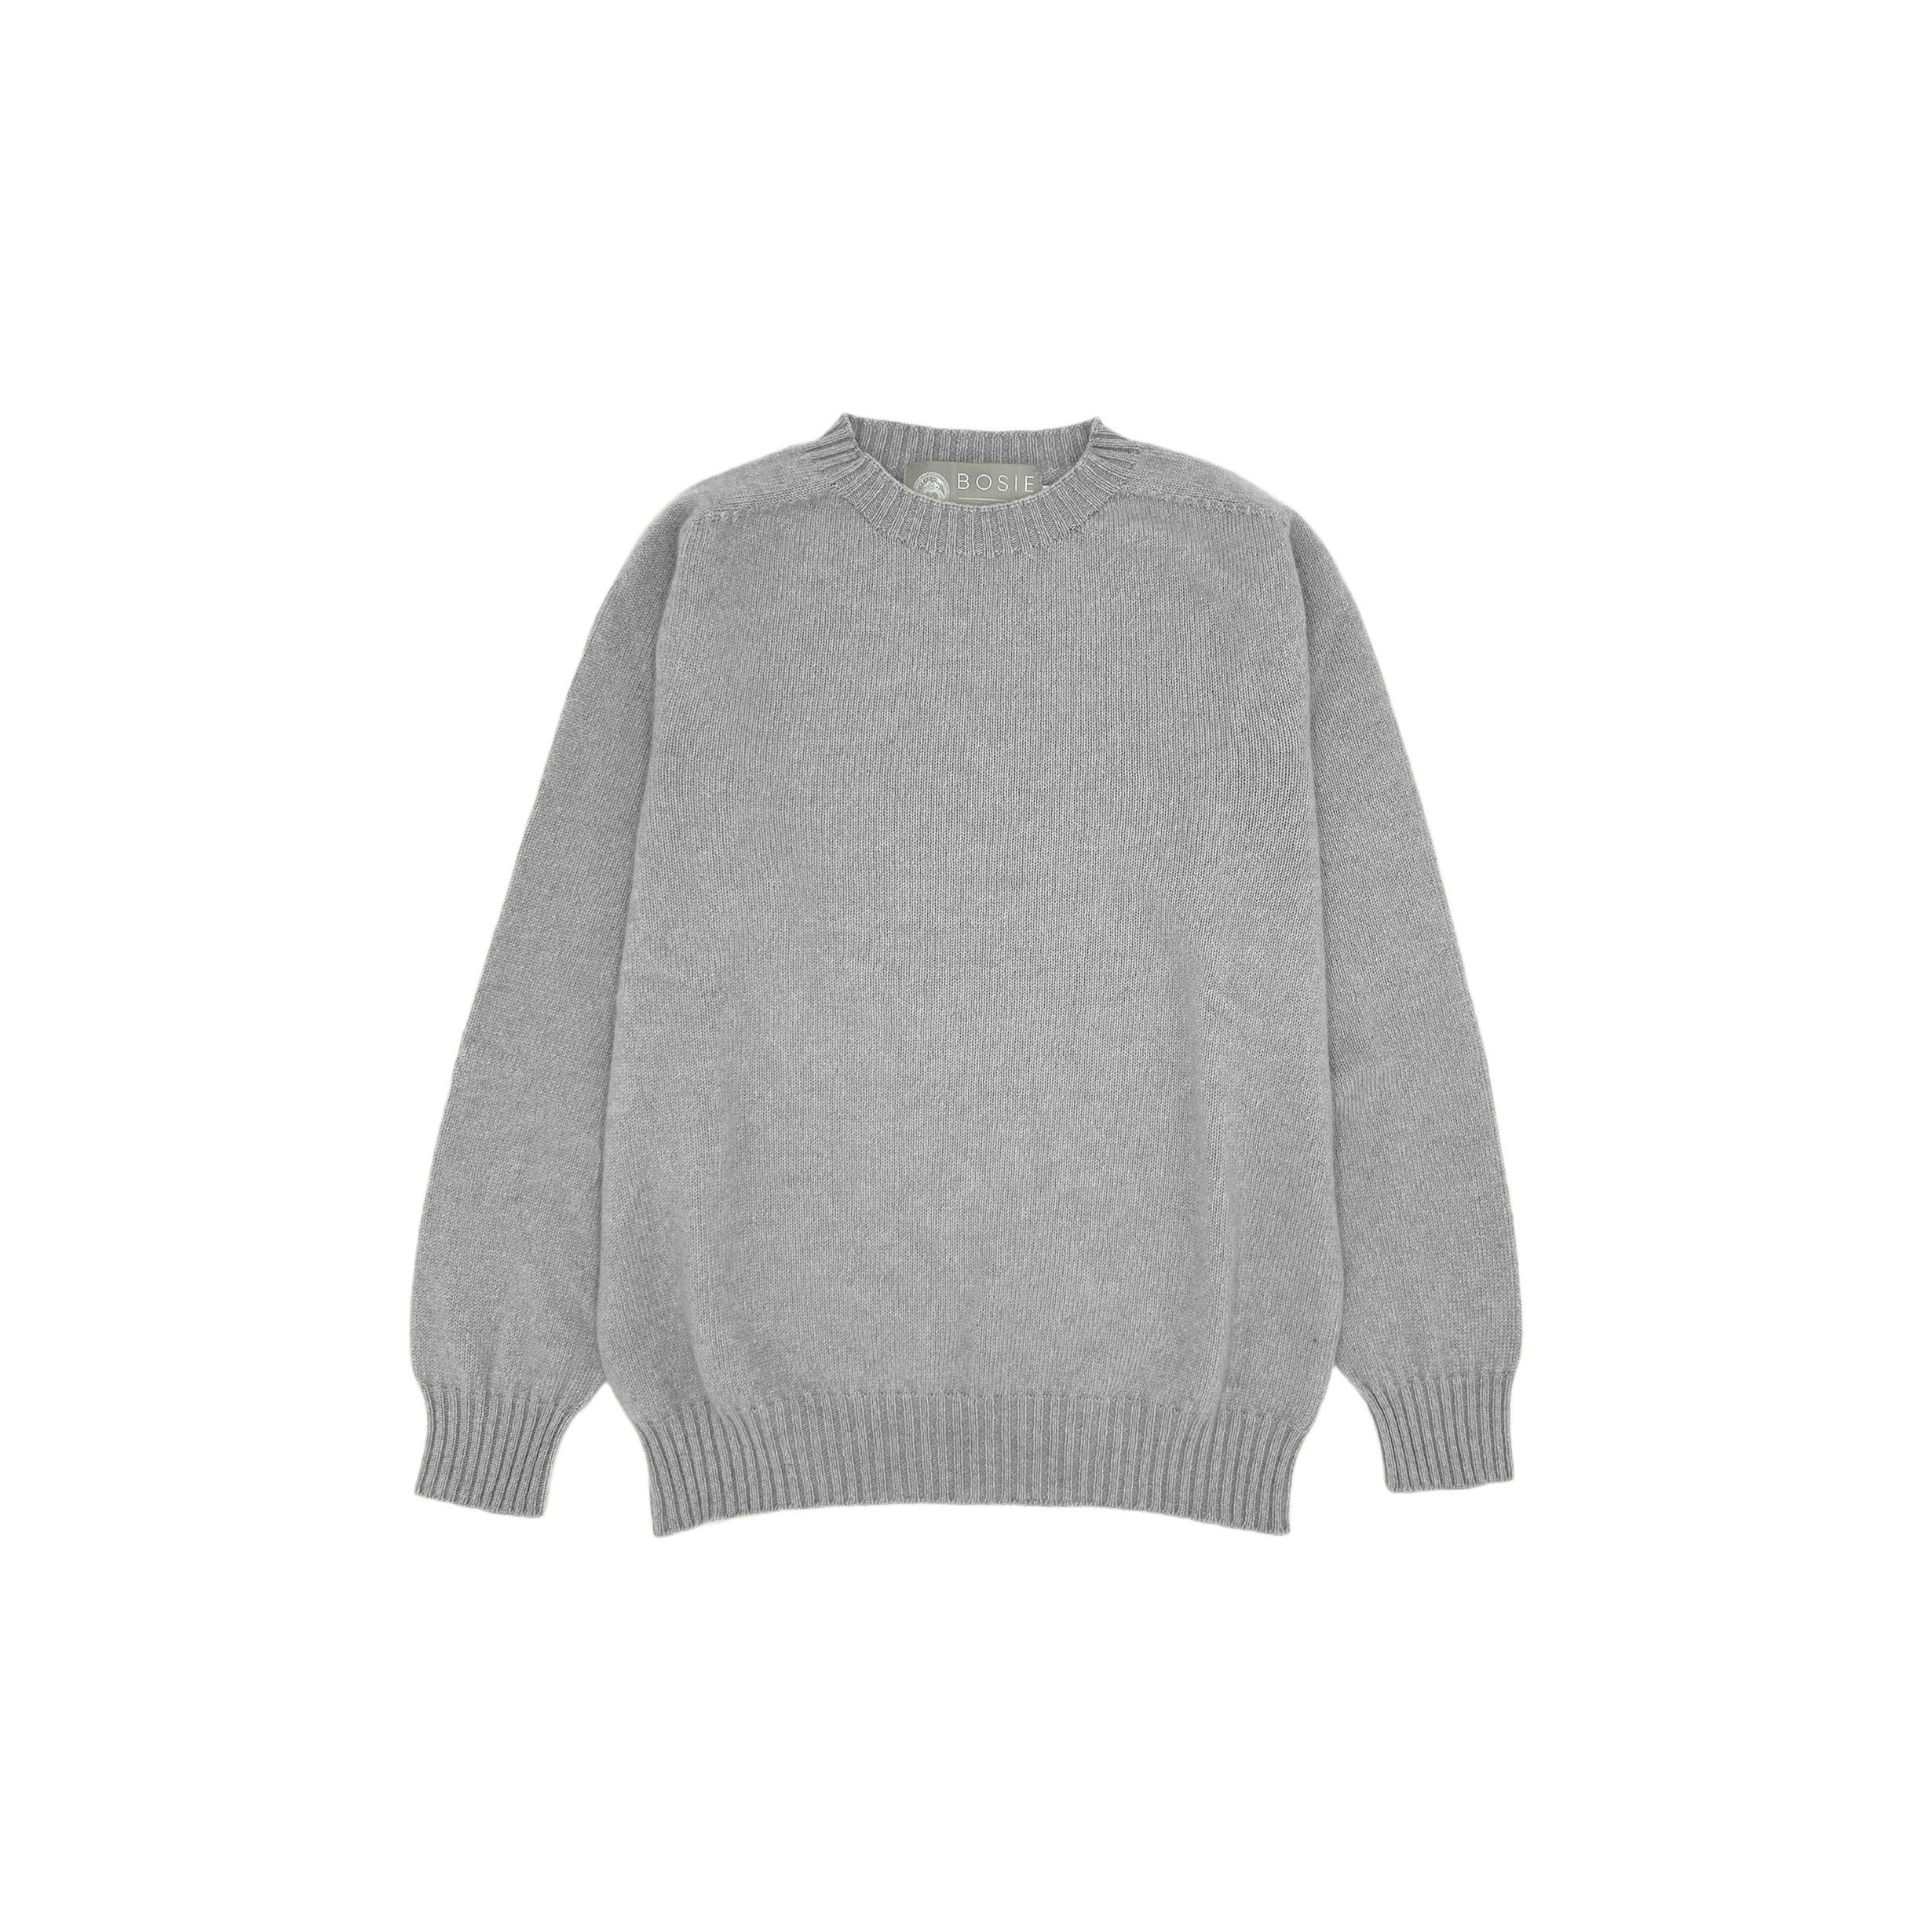 An image of Womens Harley of Scotland / Todd and Duncan 100% Finest Cashmere - Brume - Mediu...